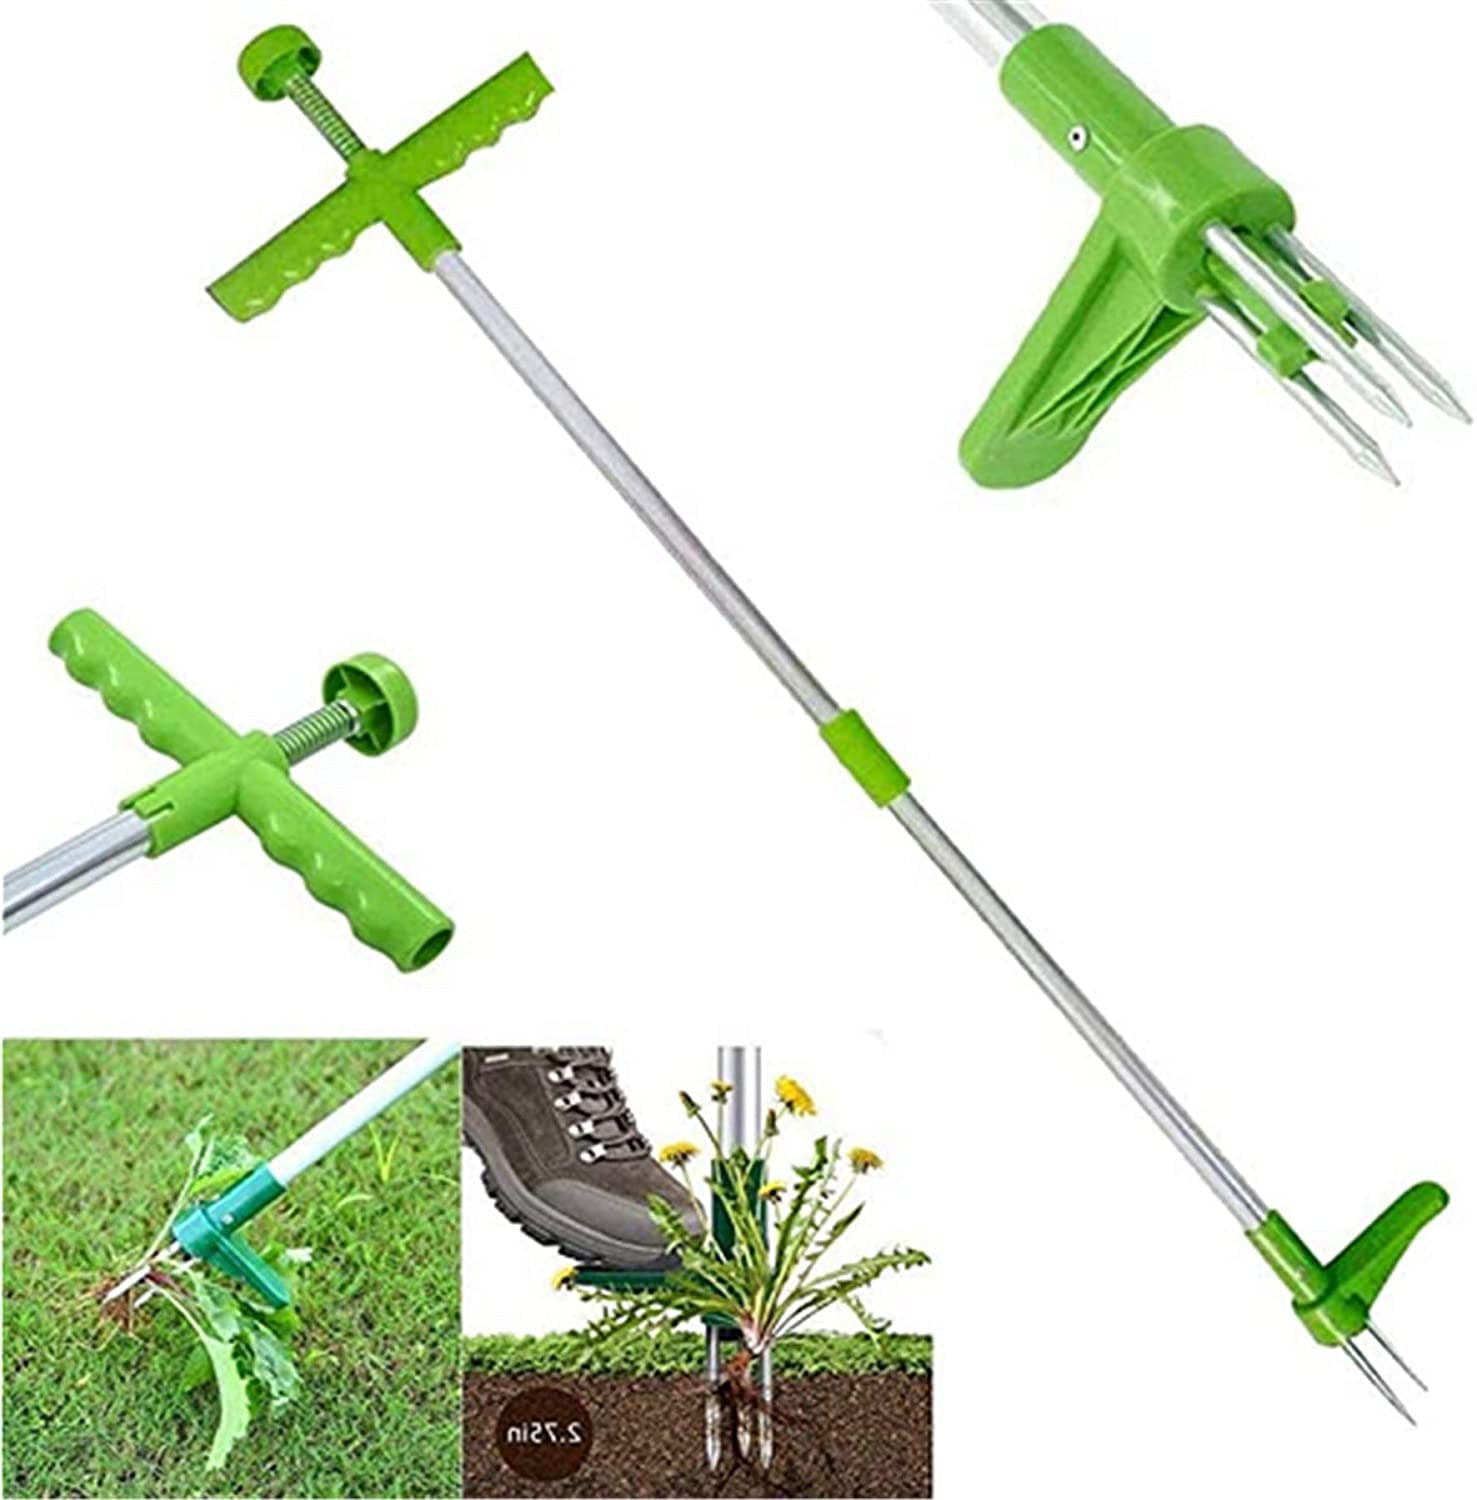 Long Handle Claw Weeder - 3 Claws, Sharp Stainless Steel, Compact Garden  Weeding Tool - Garden Hand Tool